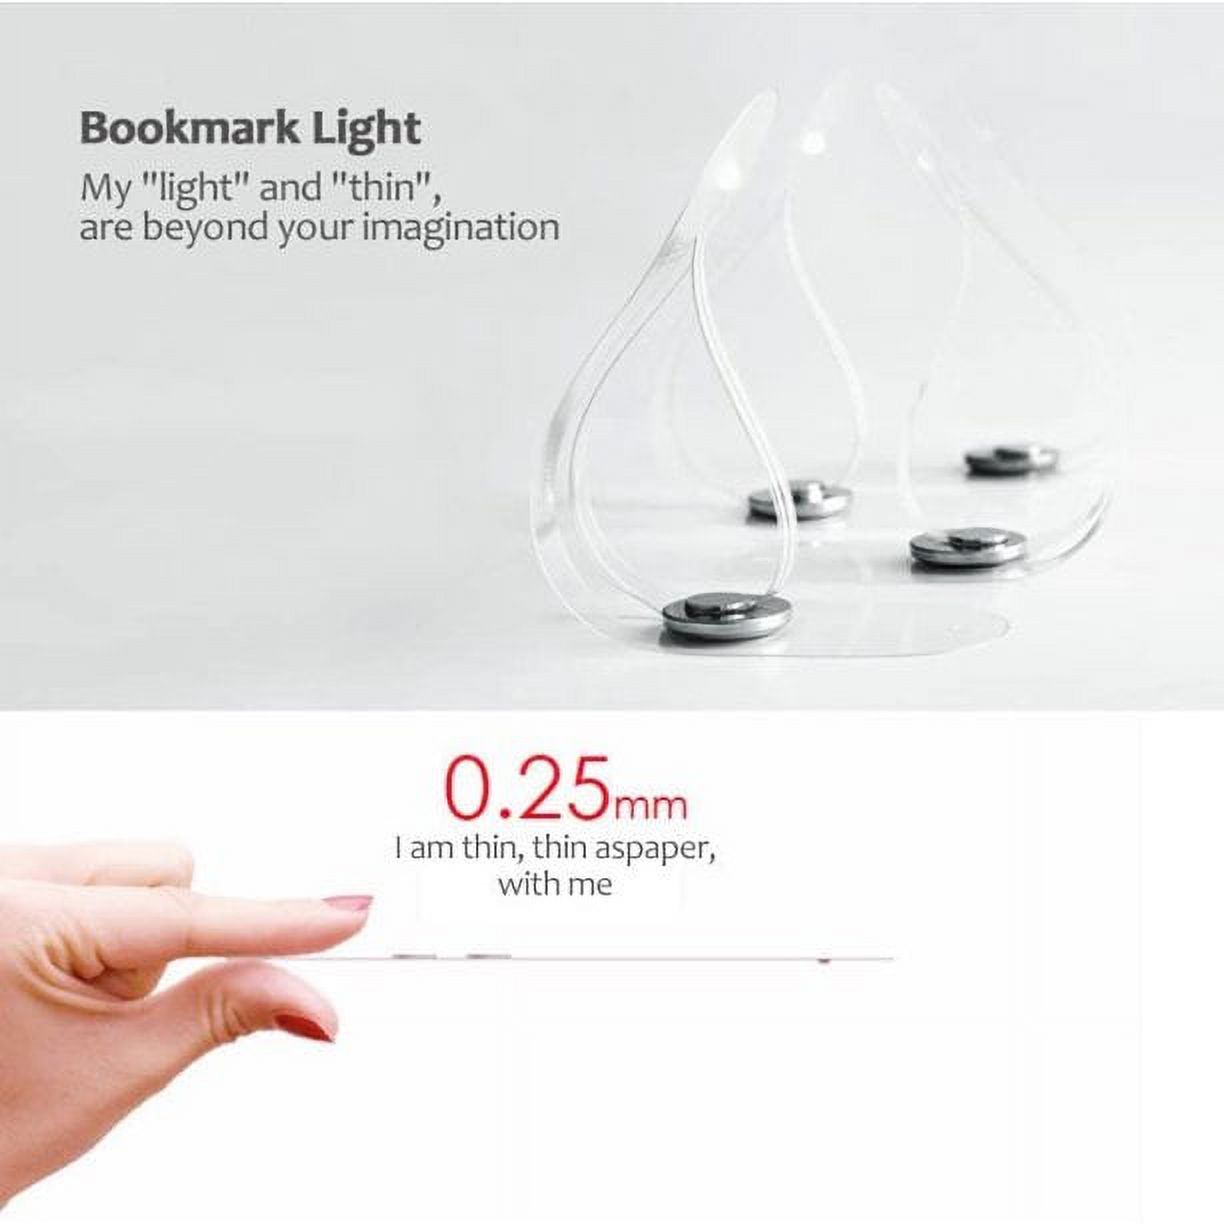 Simyoung Mini Book Light Ultra Bright Bookmark Night Lamp Flexible LED Book Reading Light Bedroom - image 5 of 5